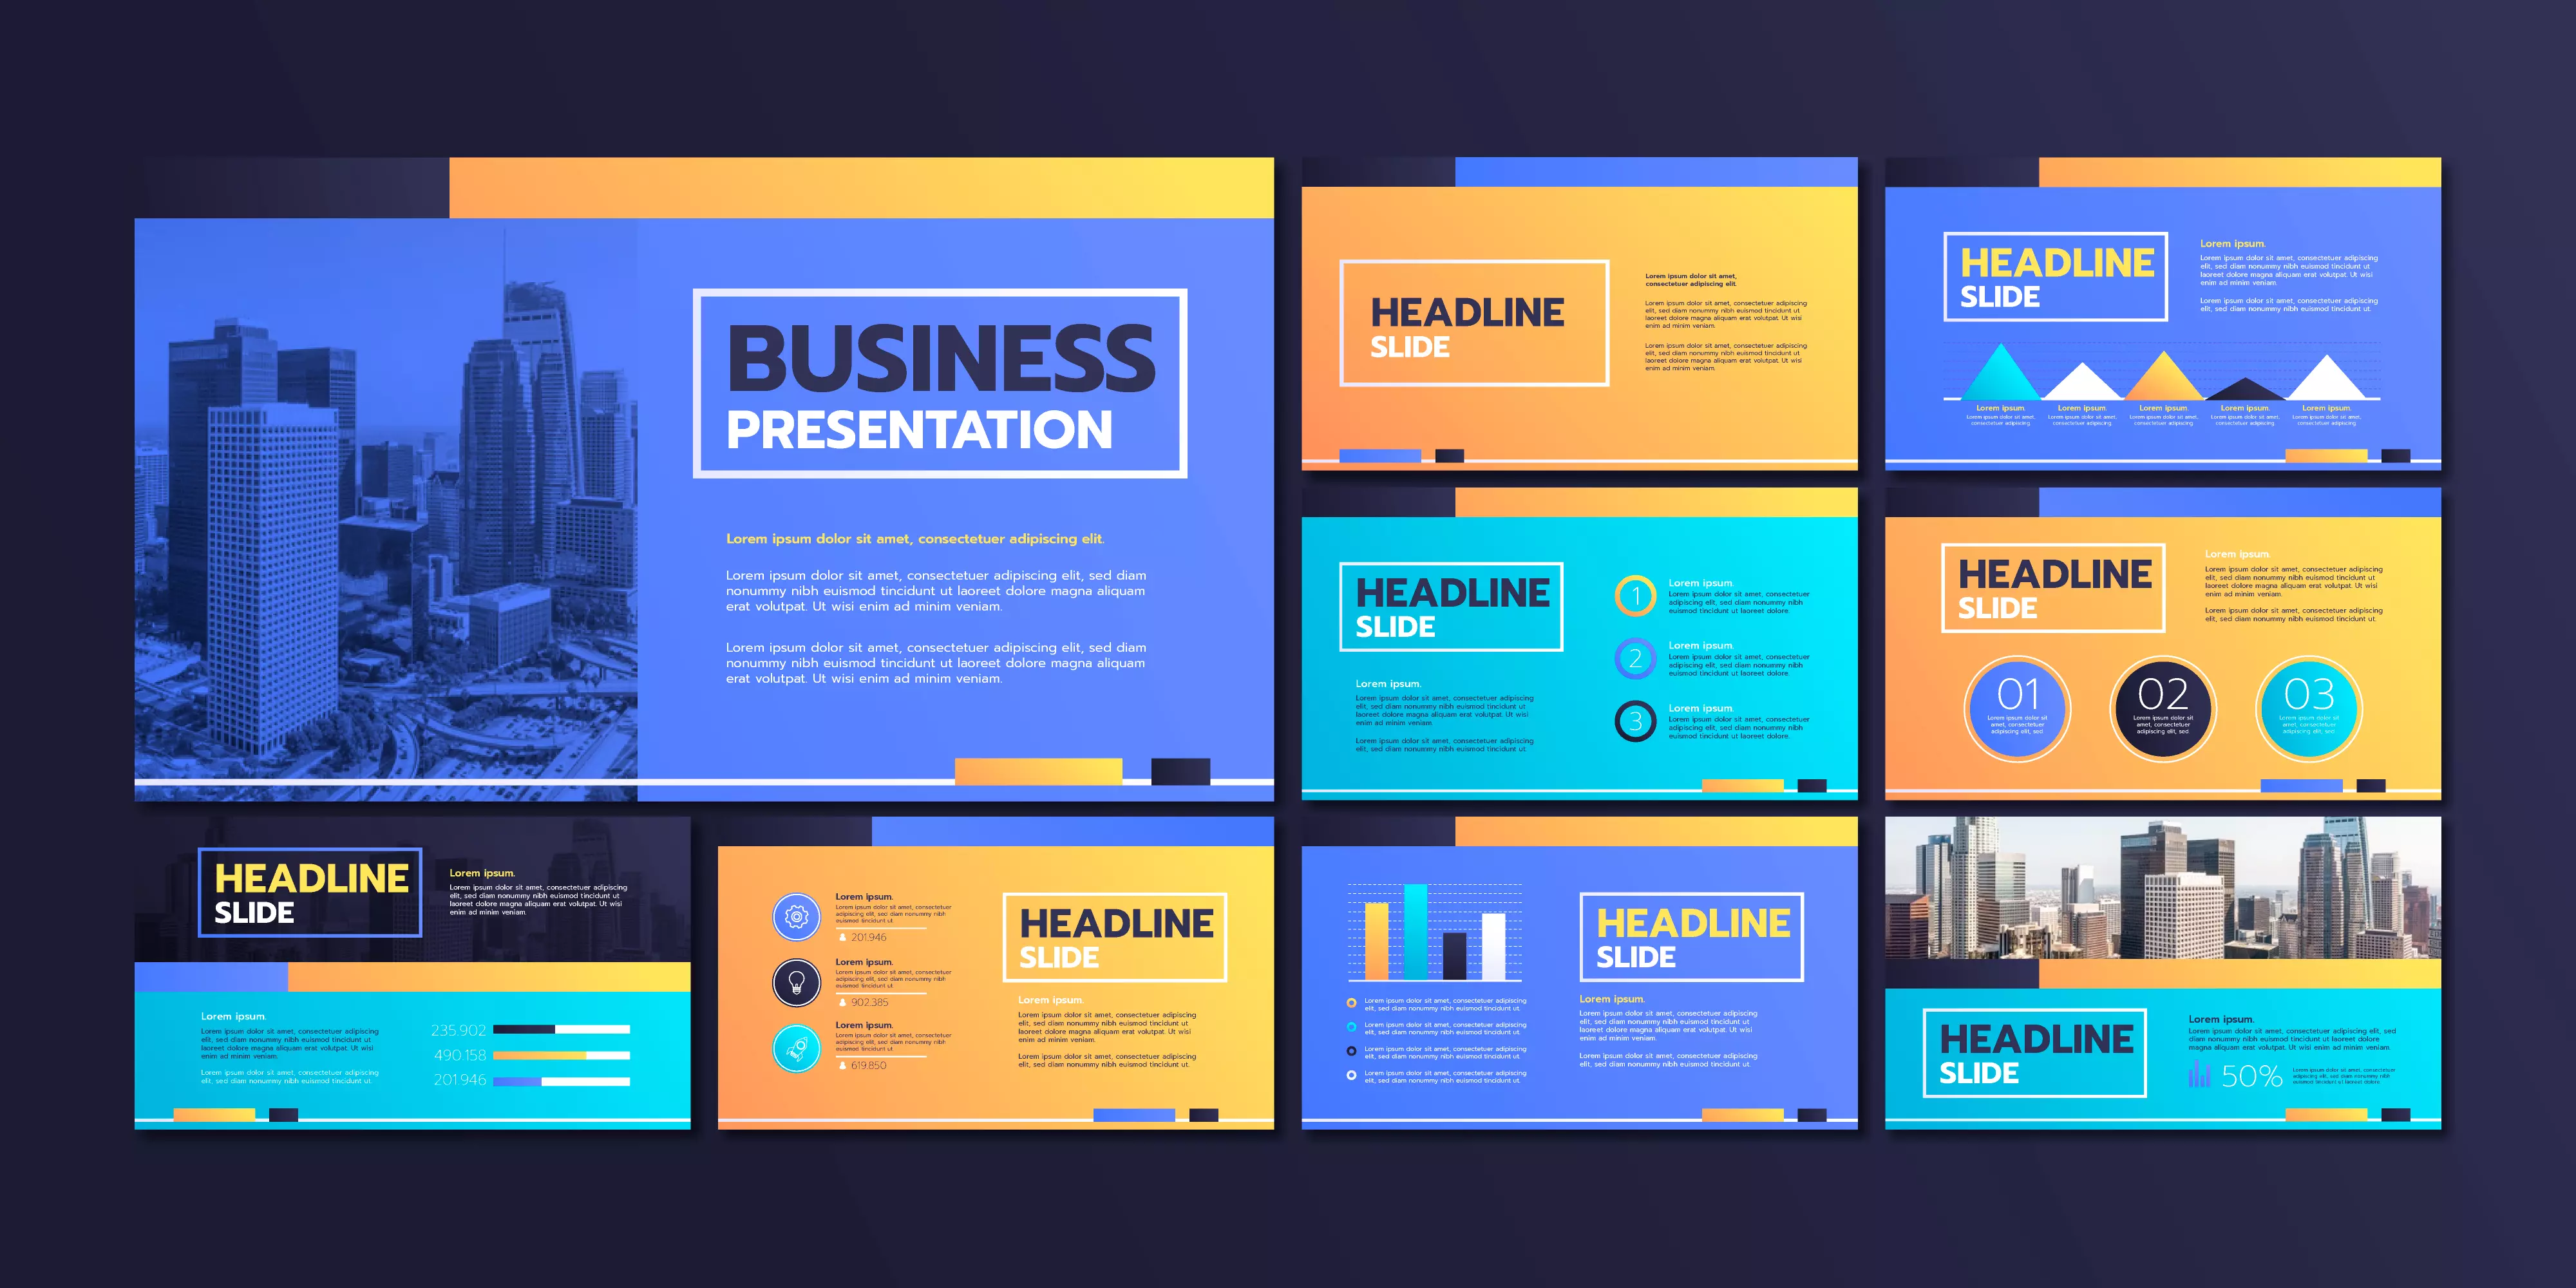 A complete template of a presentation for business